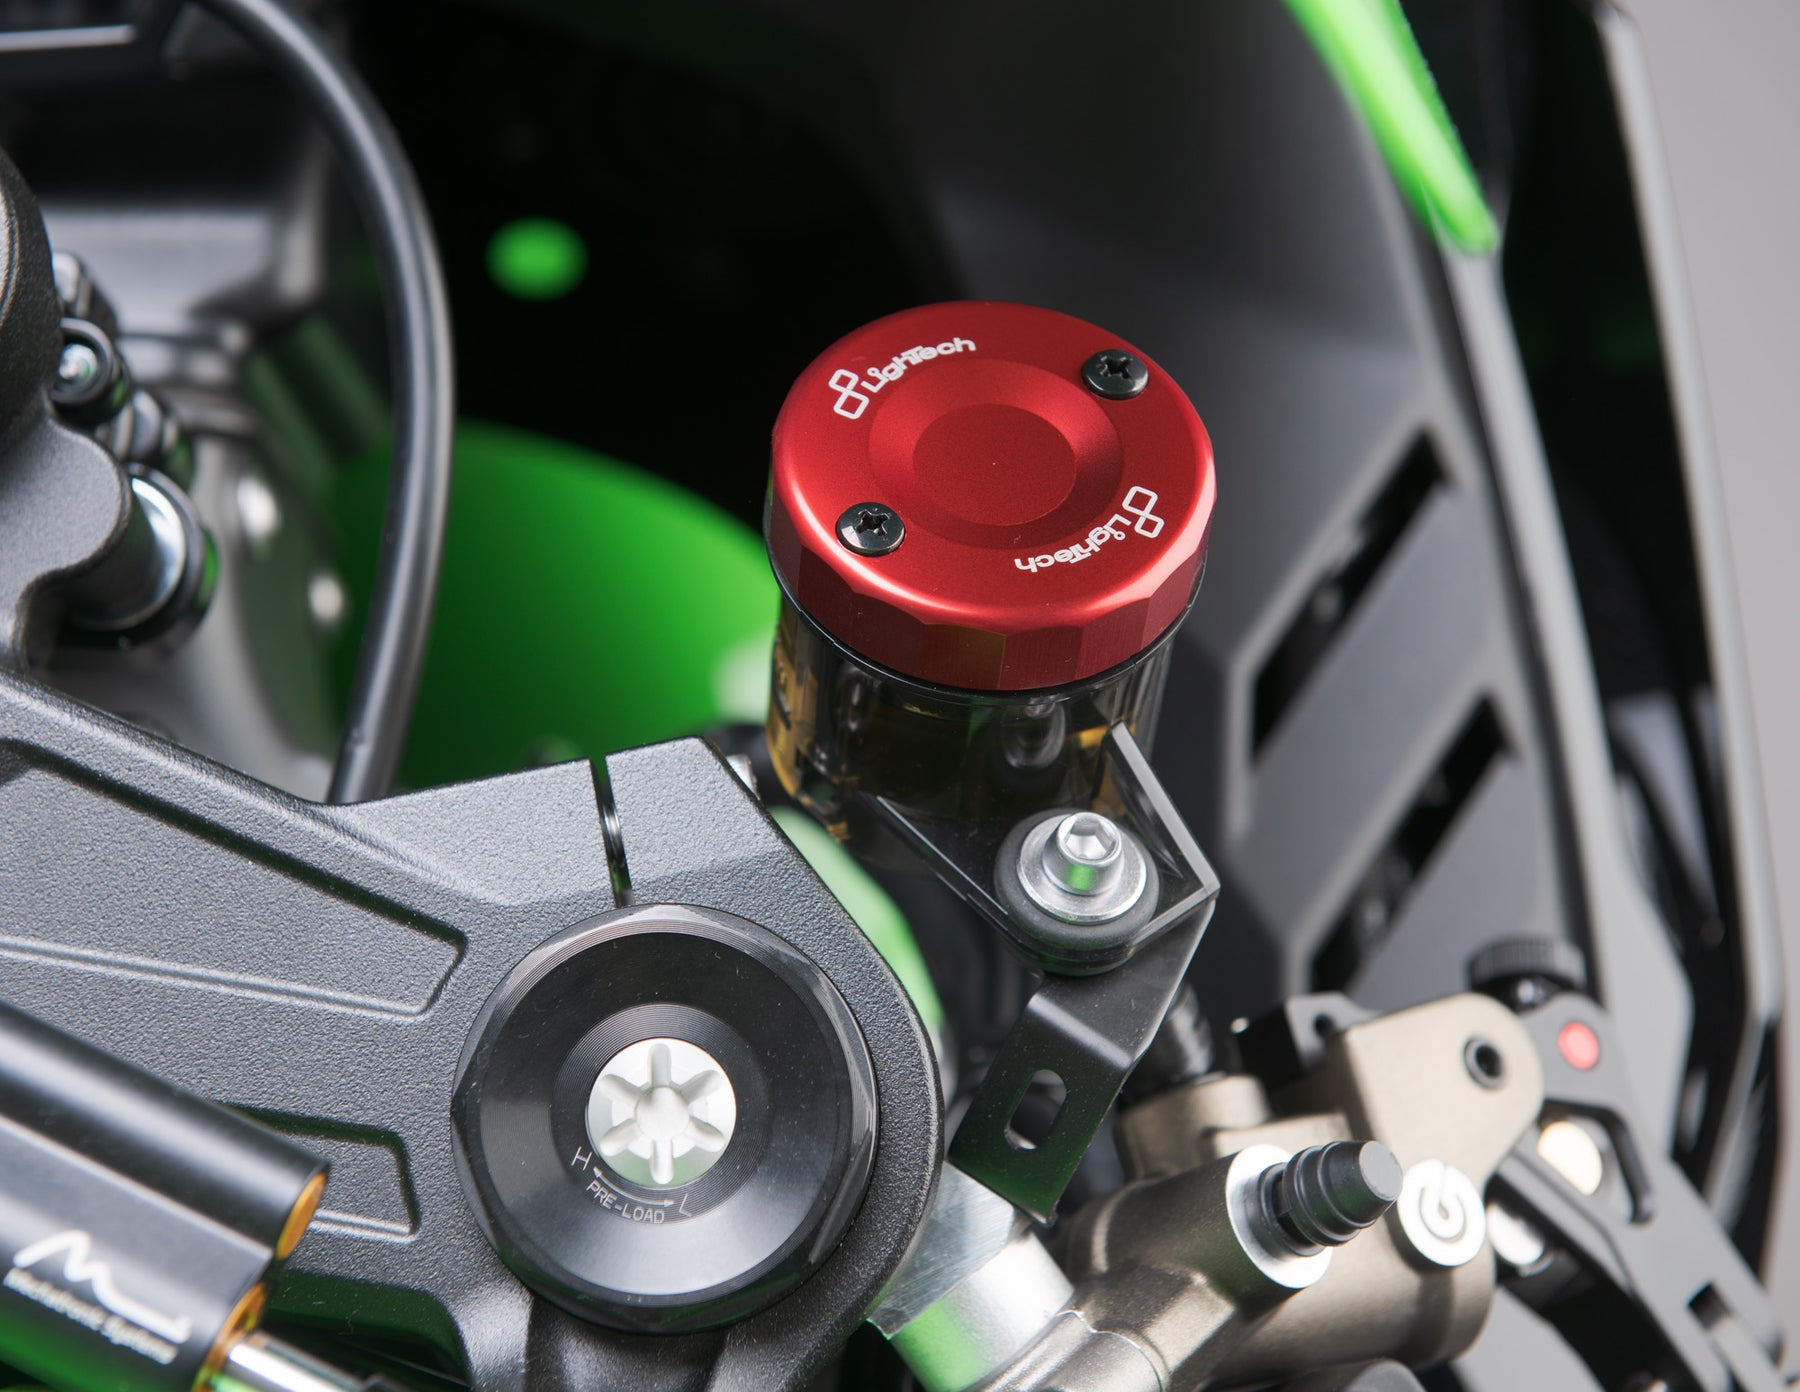 LighTech - フロントブレーキ用 フルードタンクキャップ RSV4 / RS 660 / PANIGALE 1199 /  CBR1000RR-R SP / ZX-10R / F4 RR / RC 他